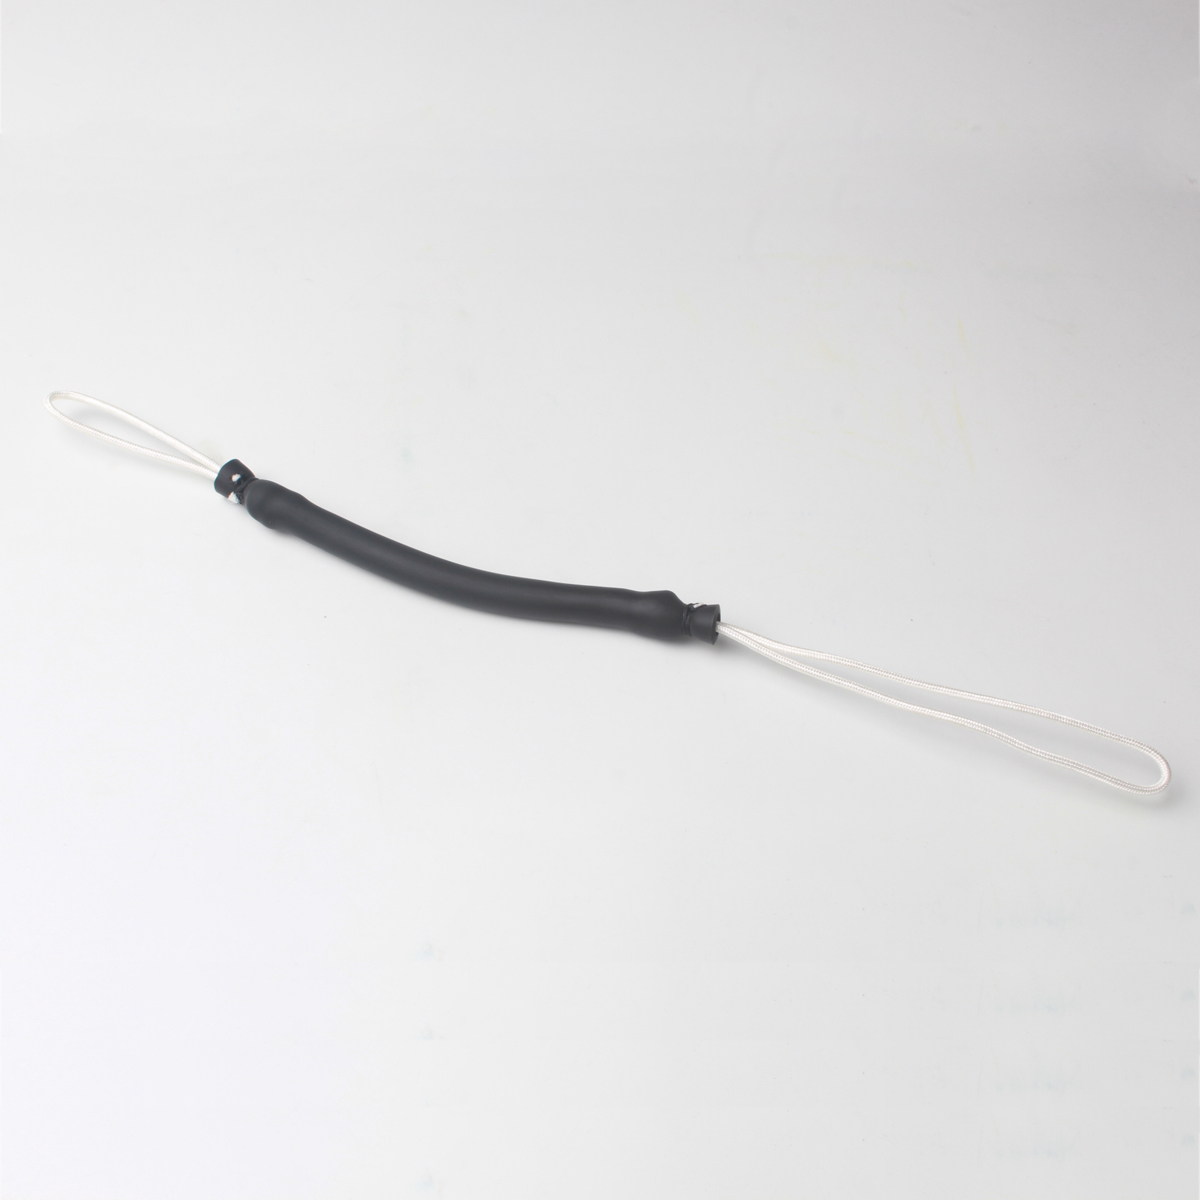 14cm Speargun Shock Cord with Spectra